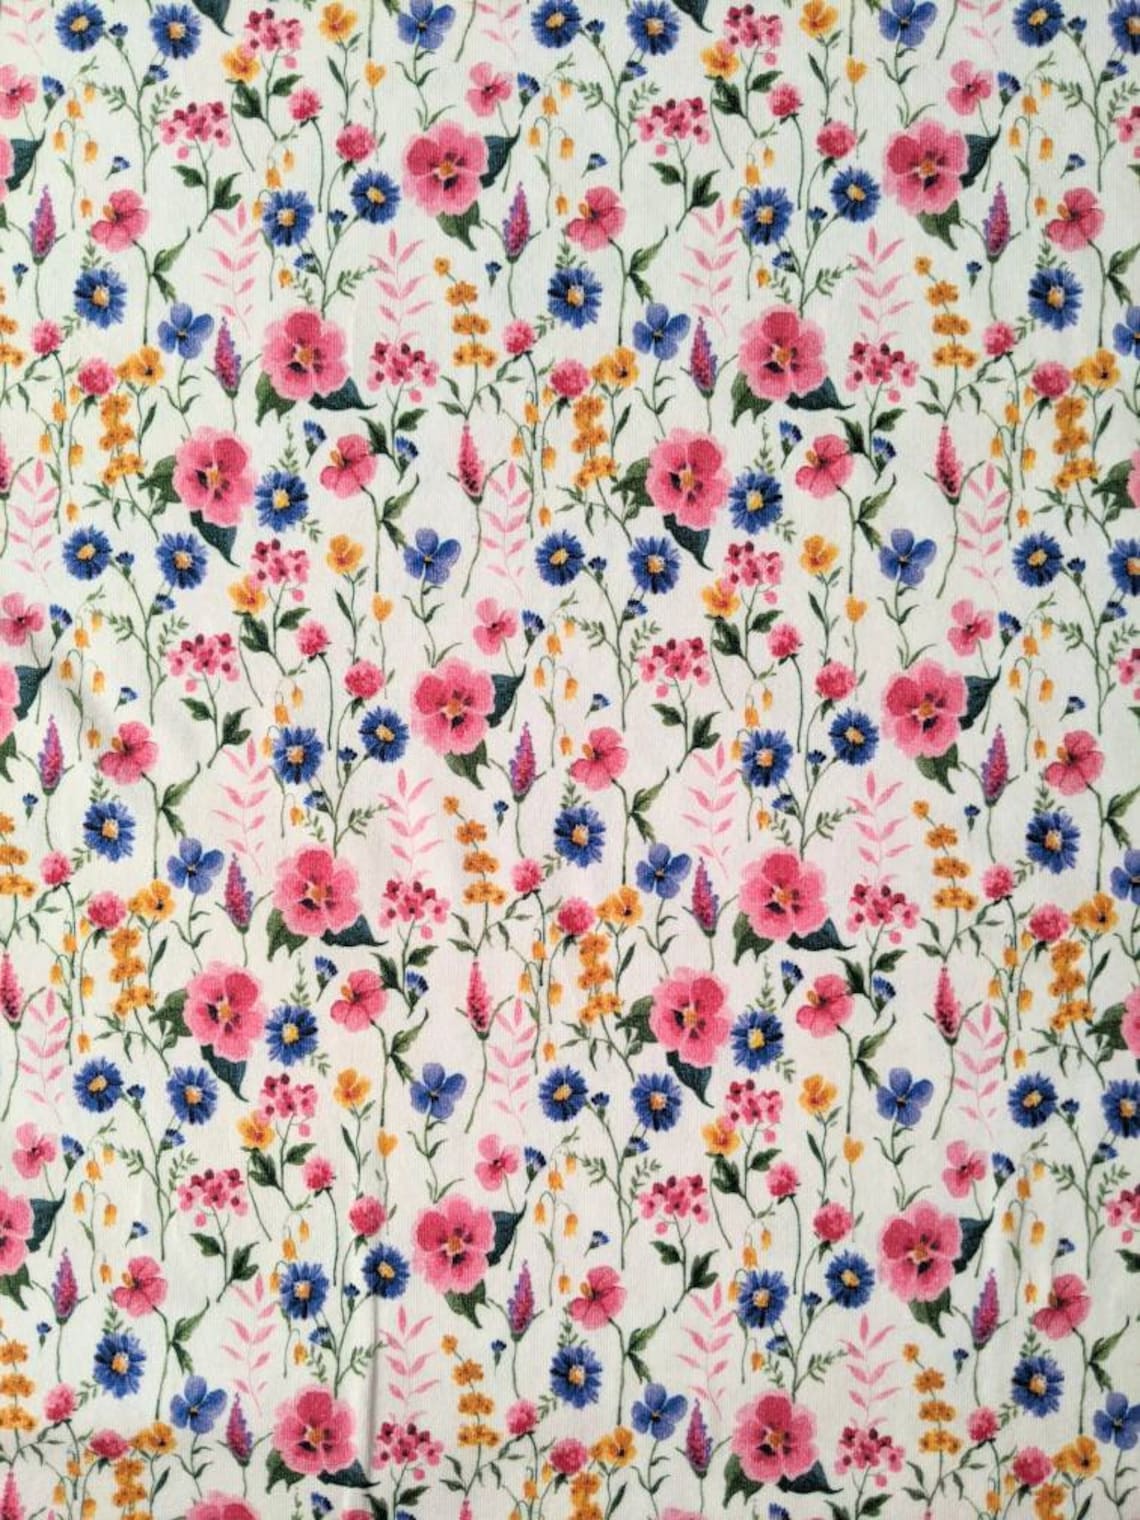 Ditsy Floral Jersey fabric White Flower Fabric | Etsy